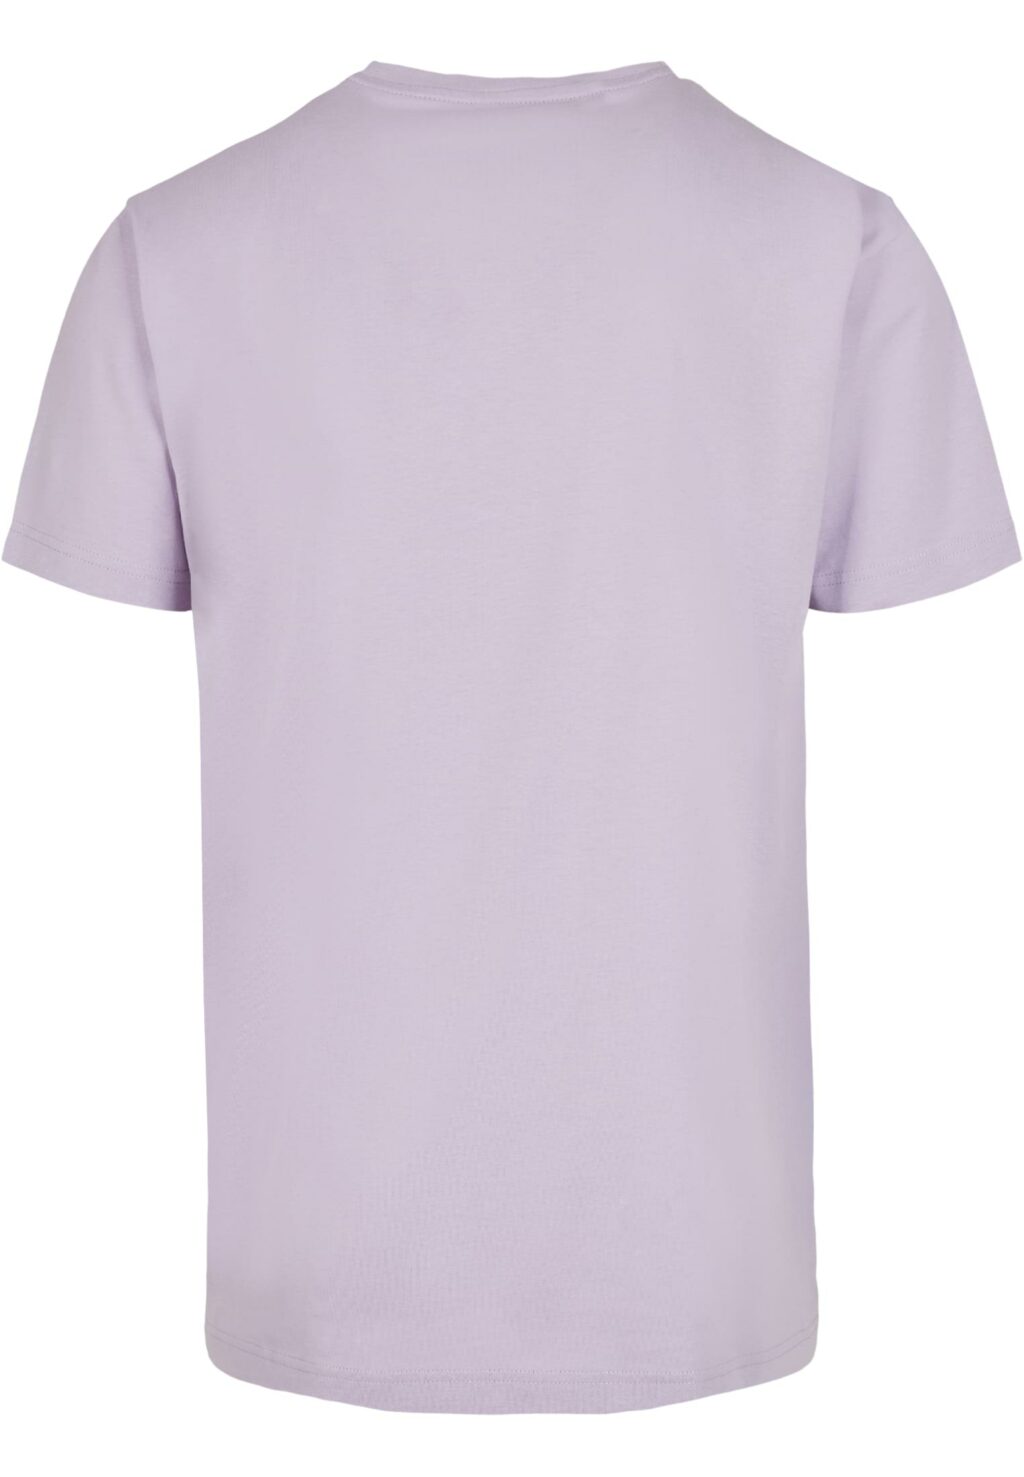 Seagull Sneakers Tee lilac MT1926